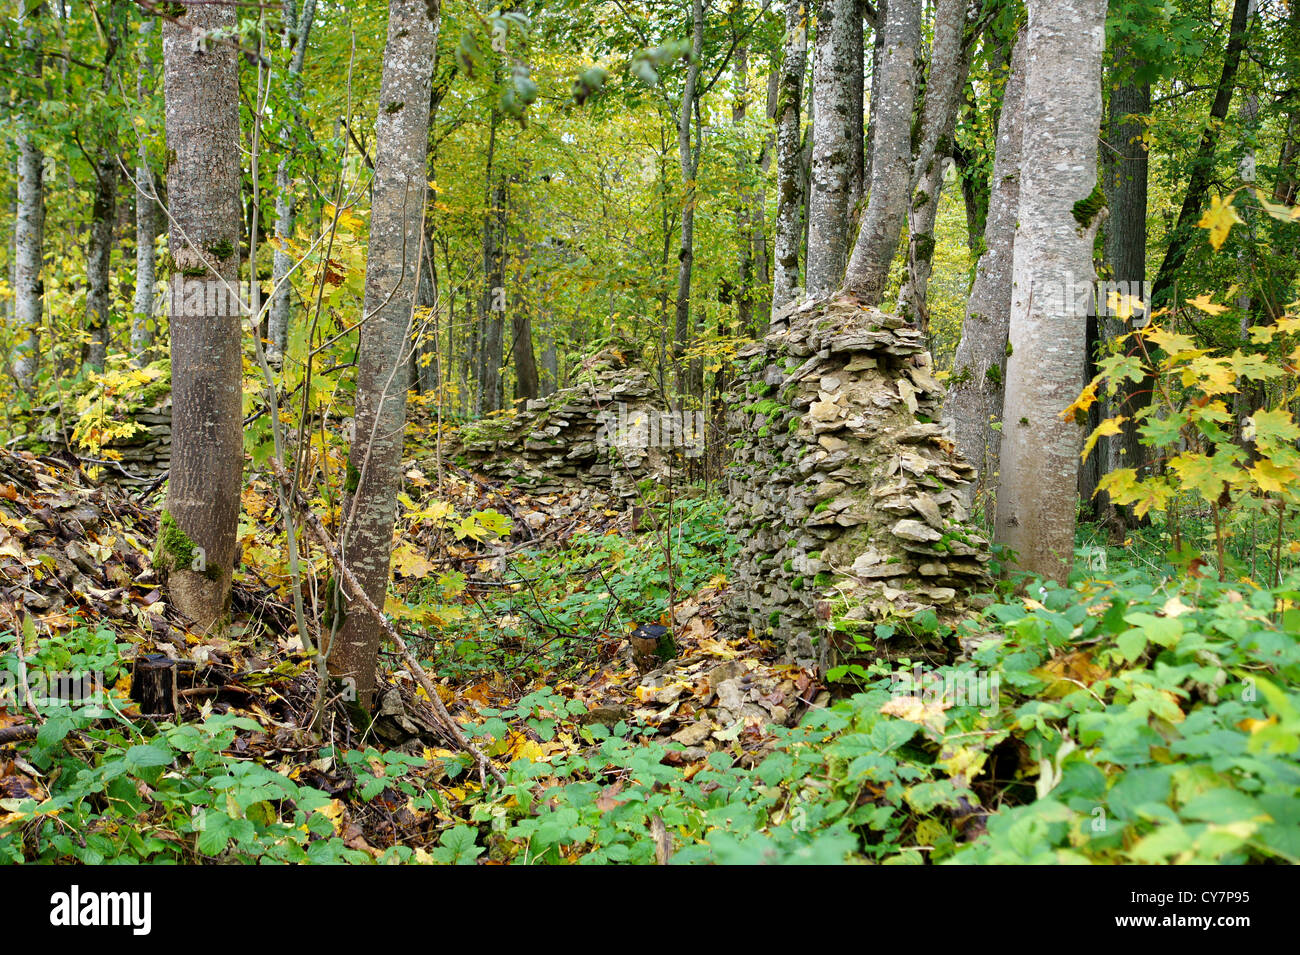 Ruins of an old building in a forest Stock Photo